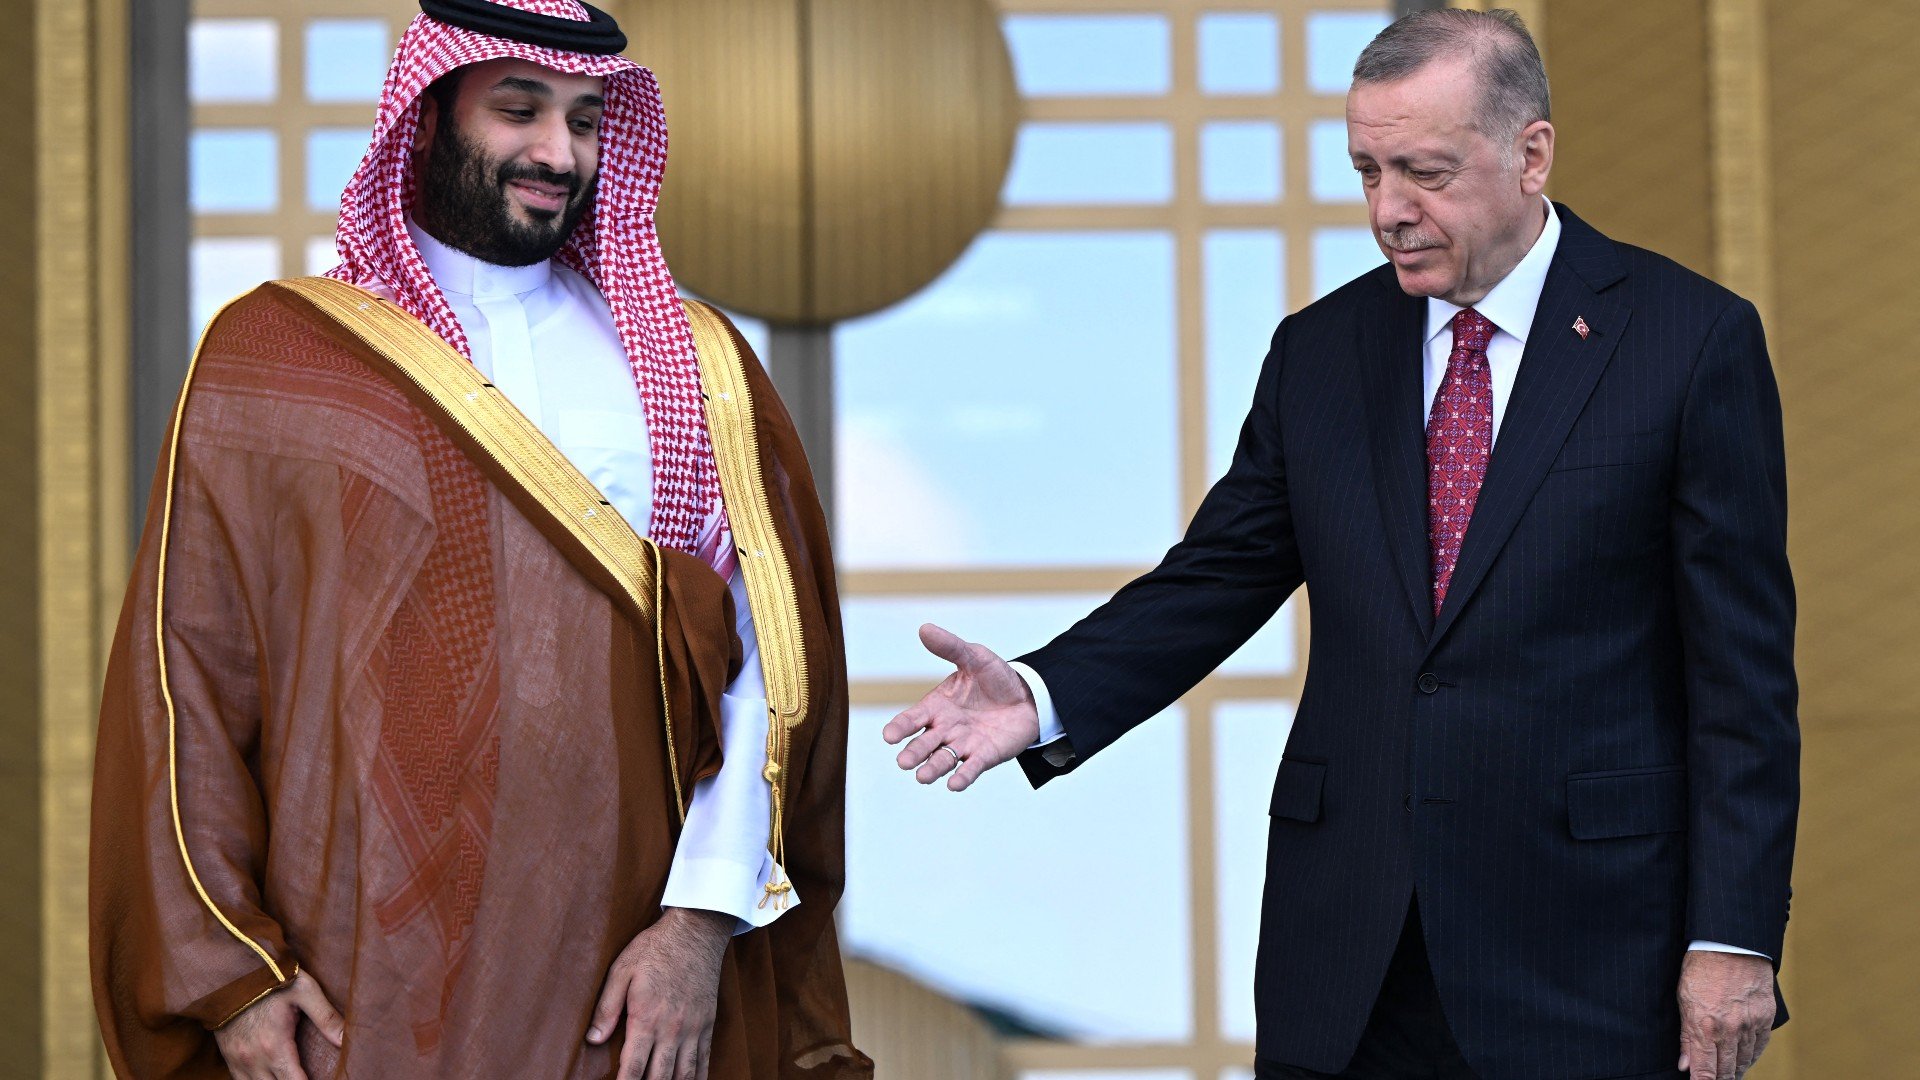 Turkish President Recep Tayyip Erdogan (R) welcomes Saudi Crown Prince Mohammed bin Salman (L) upon his arrival during an official ceremony at the Presidential Complex in Ankara on June 22, 2022